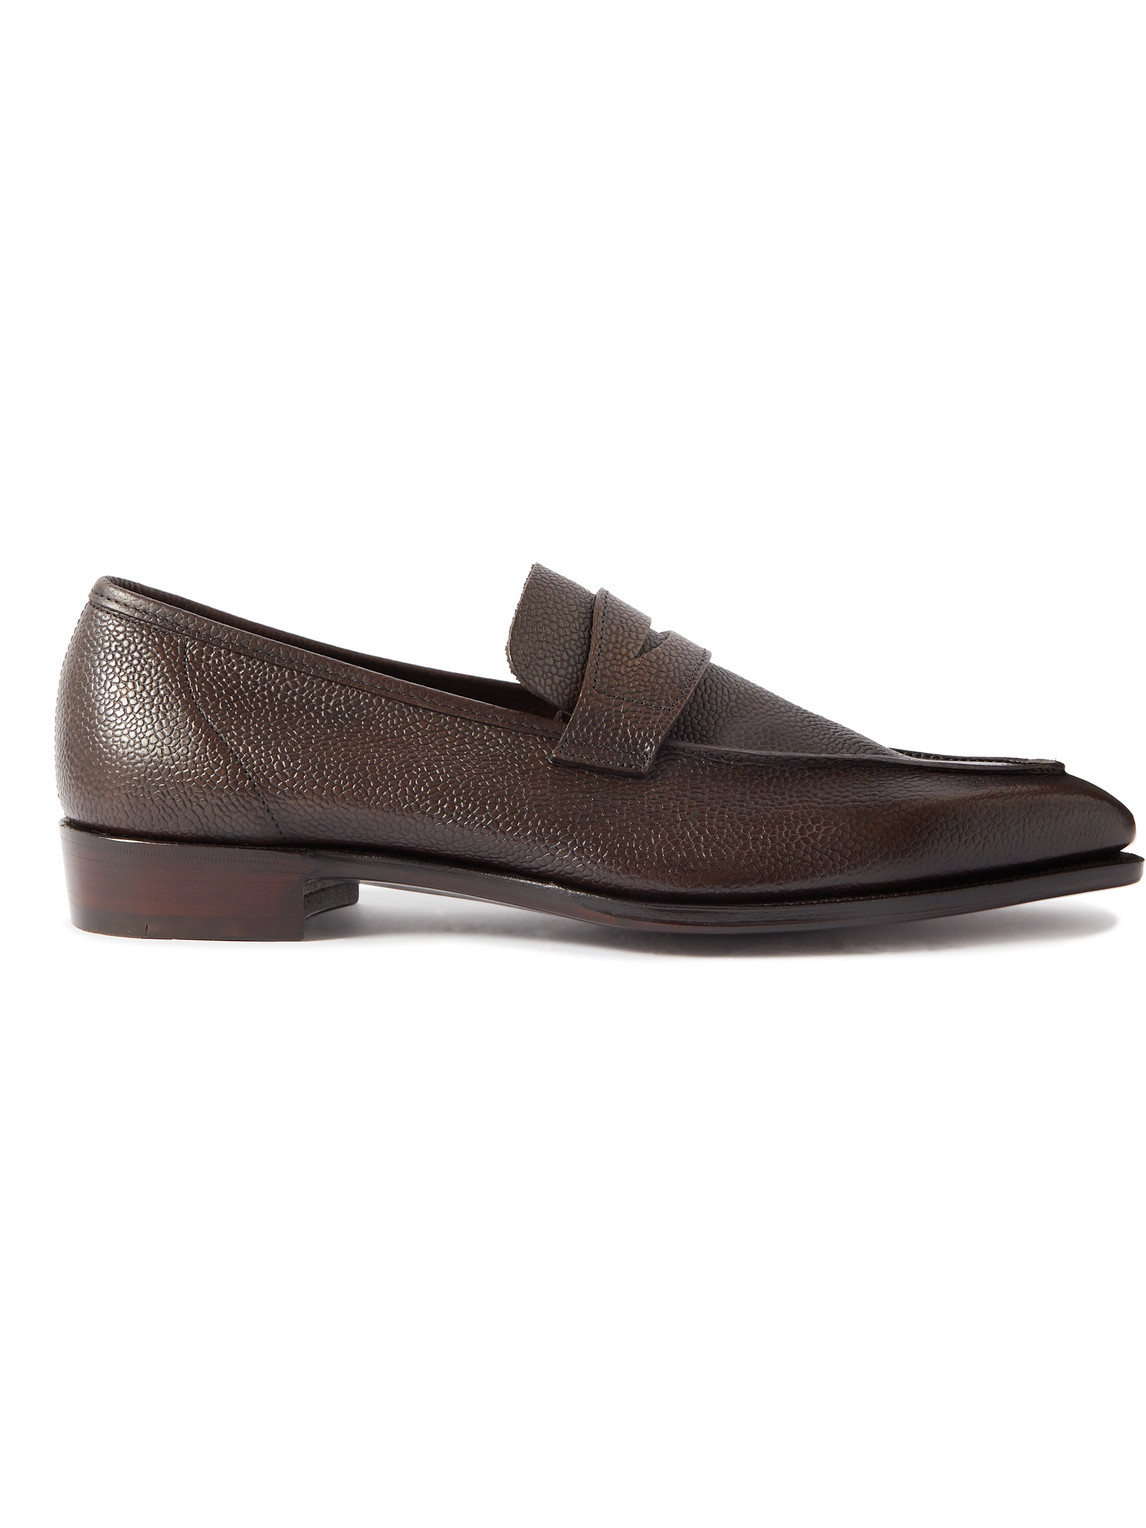 George Full-Grain Leather Penny Loafers